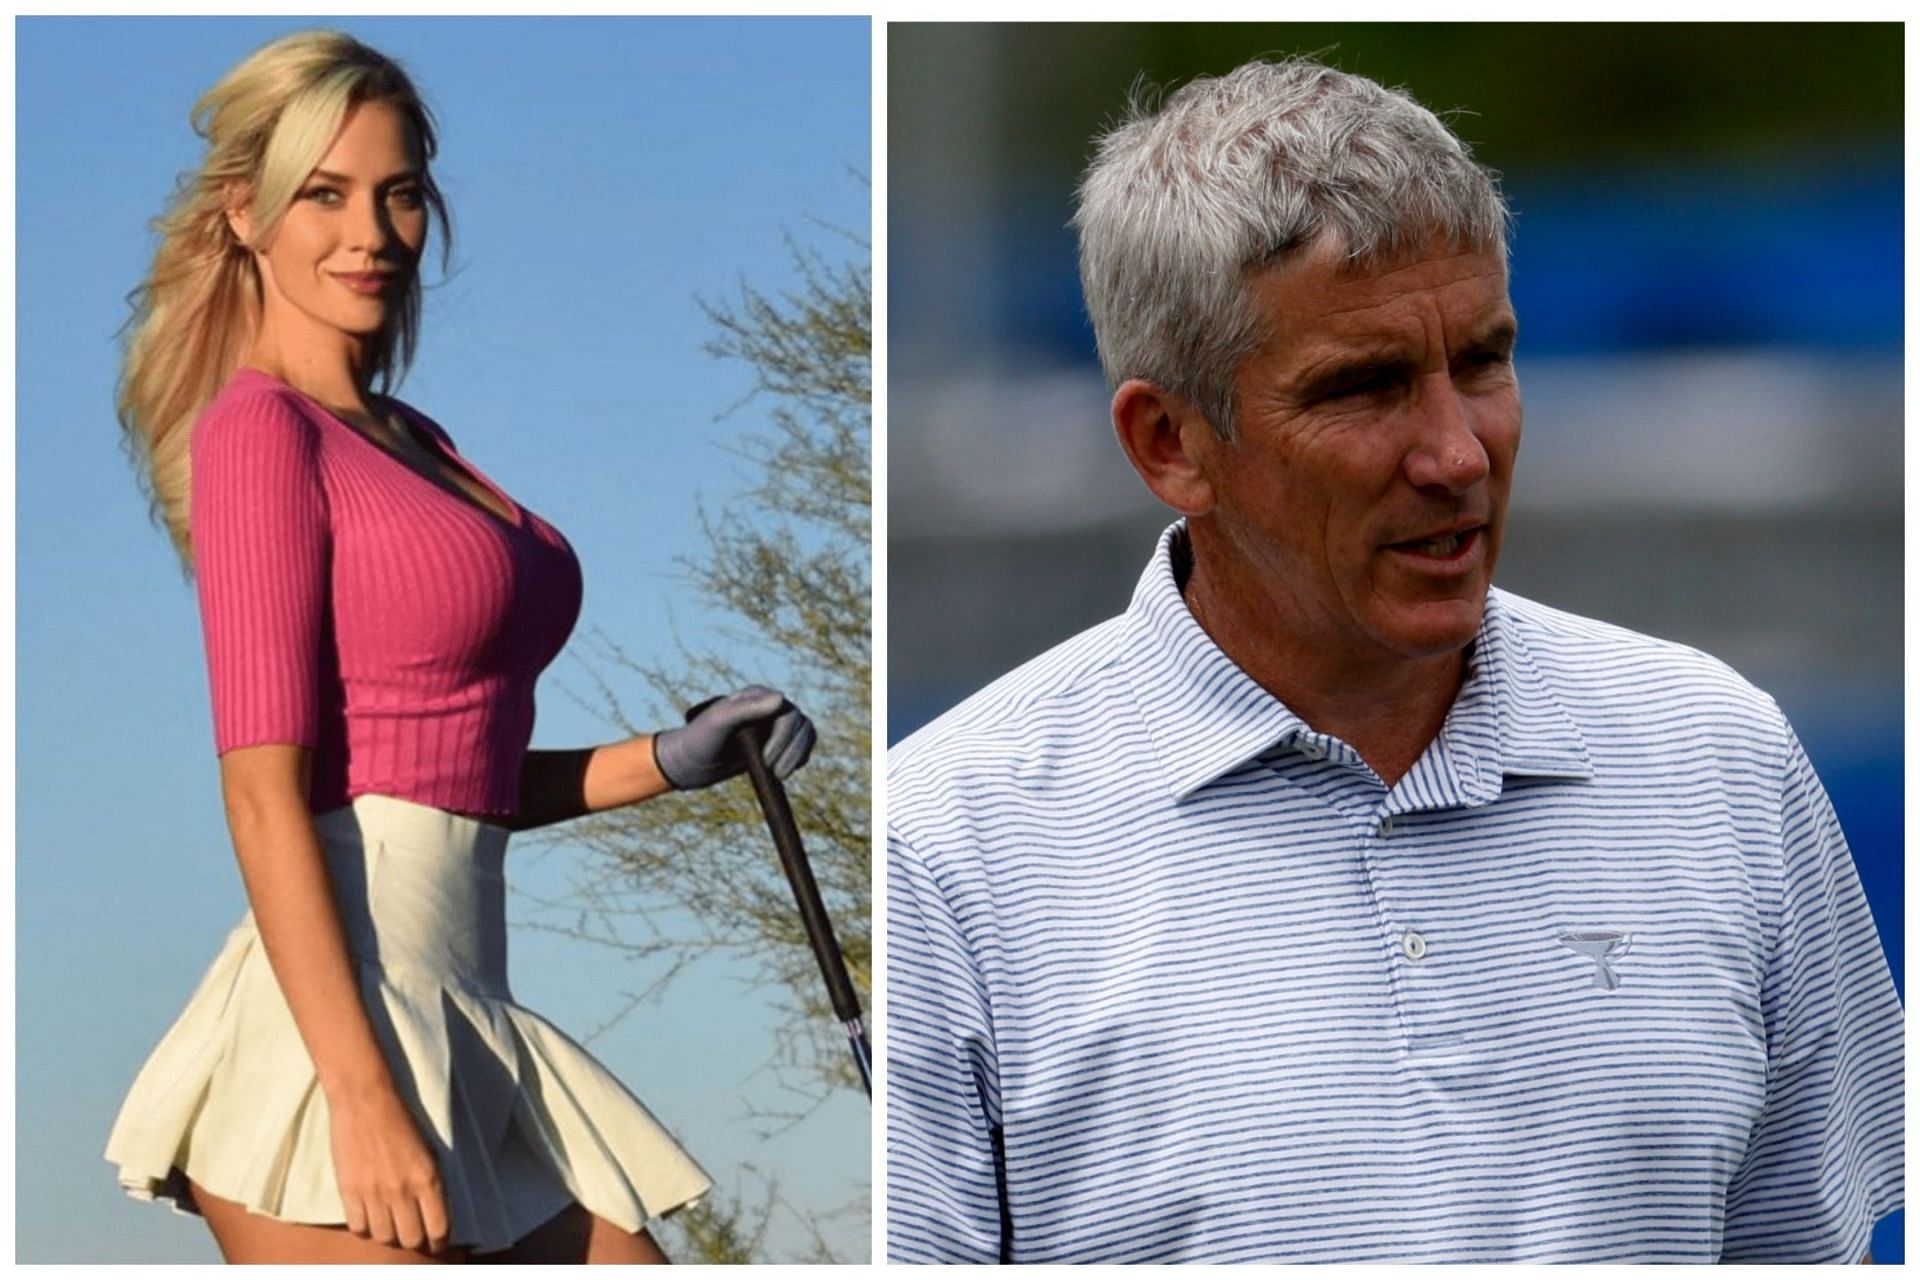 Paige Spiranac took a jibe at Jay Monahan on Twitter amid the LIV-PGA merger